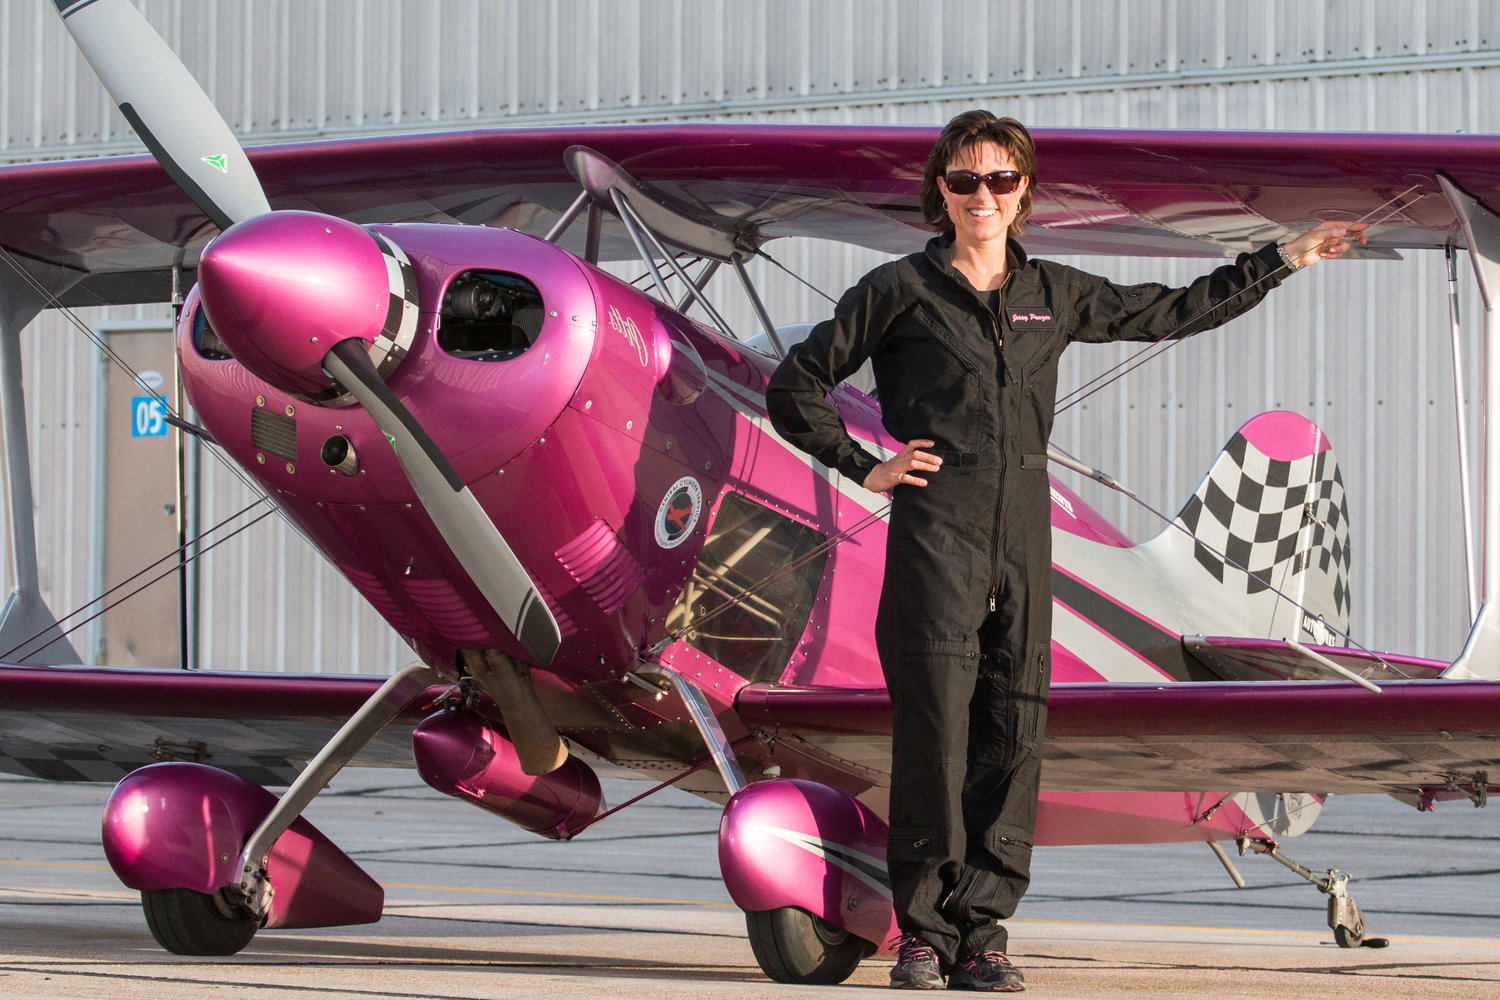 Jessy Panzer has done many air shows before, but will fly in the Bethpage Air Show for just the second time — and her first time back in her single-seat pink airplane.